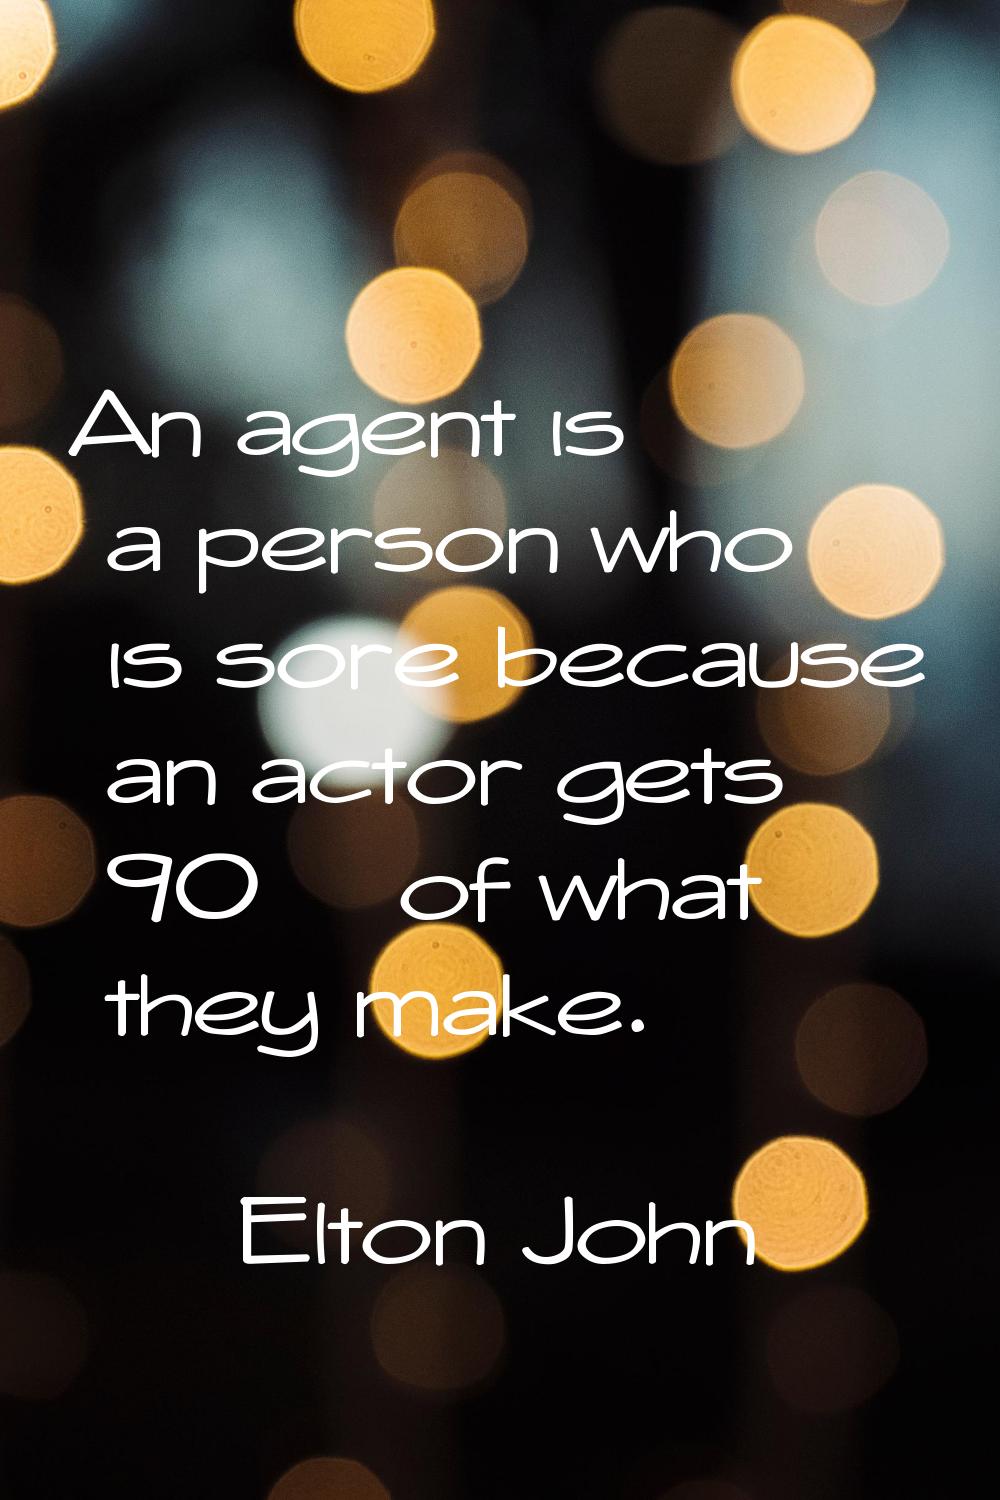 An agent is a person who is sore because an actor gets 90% of what they make.